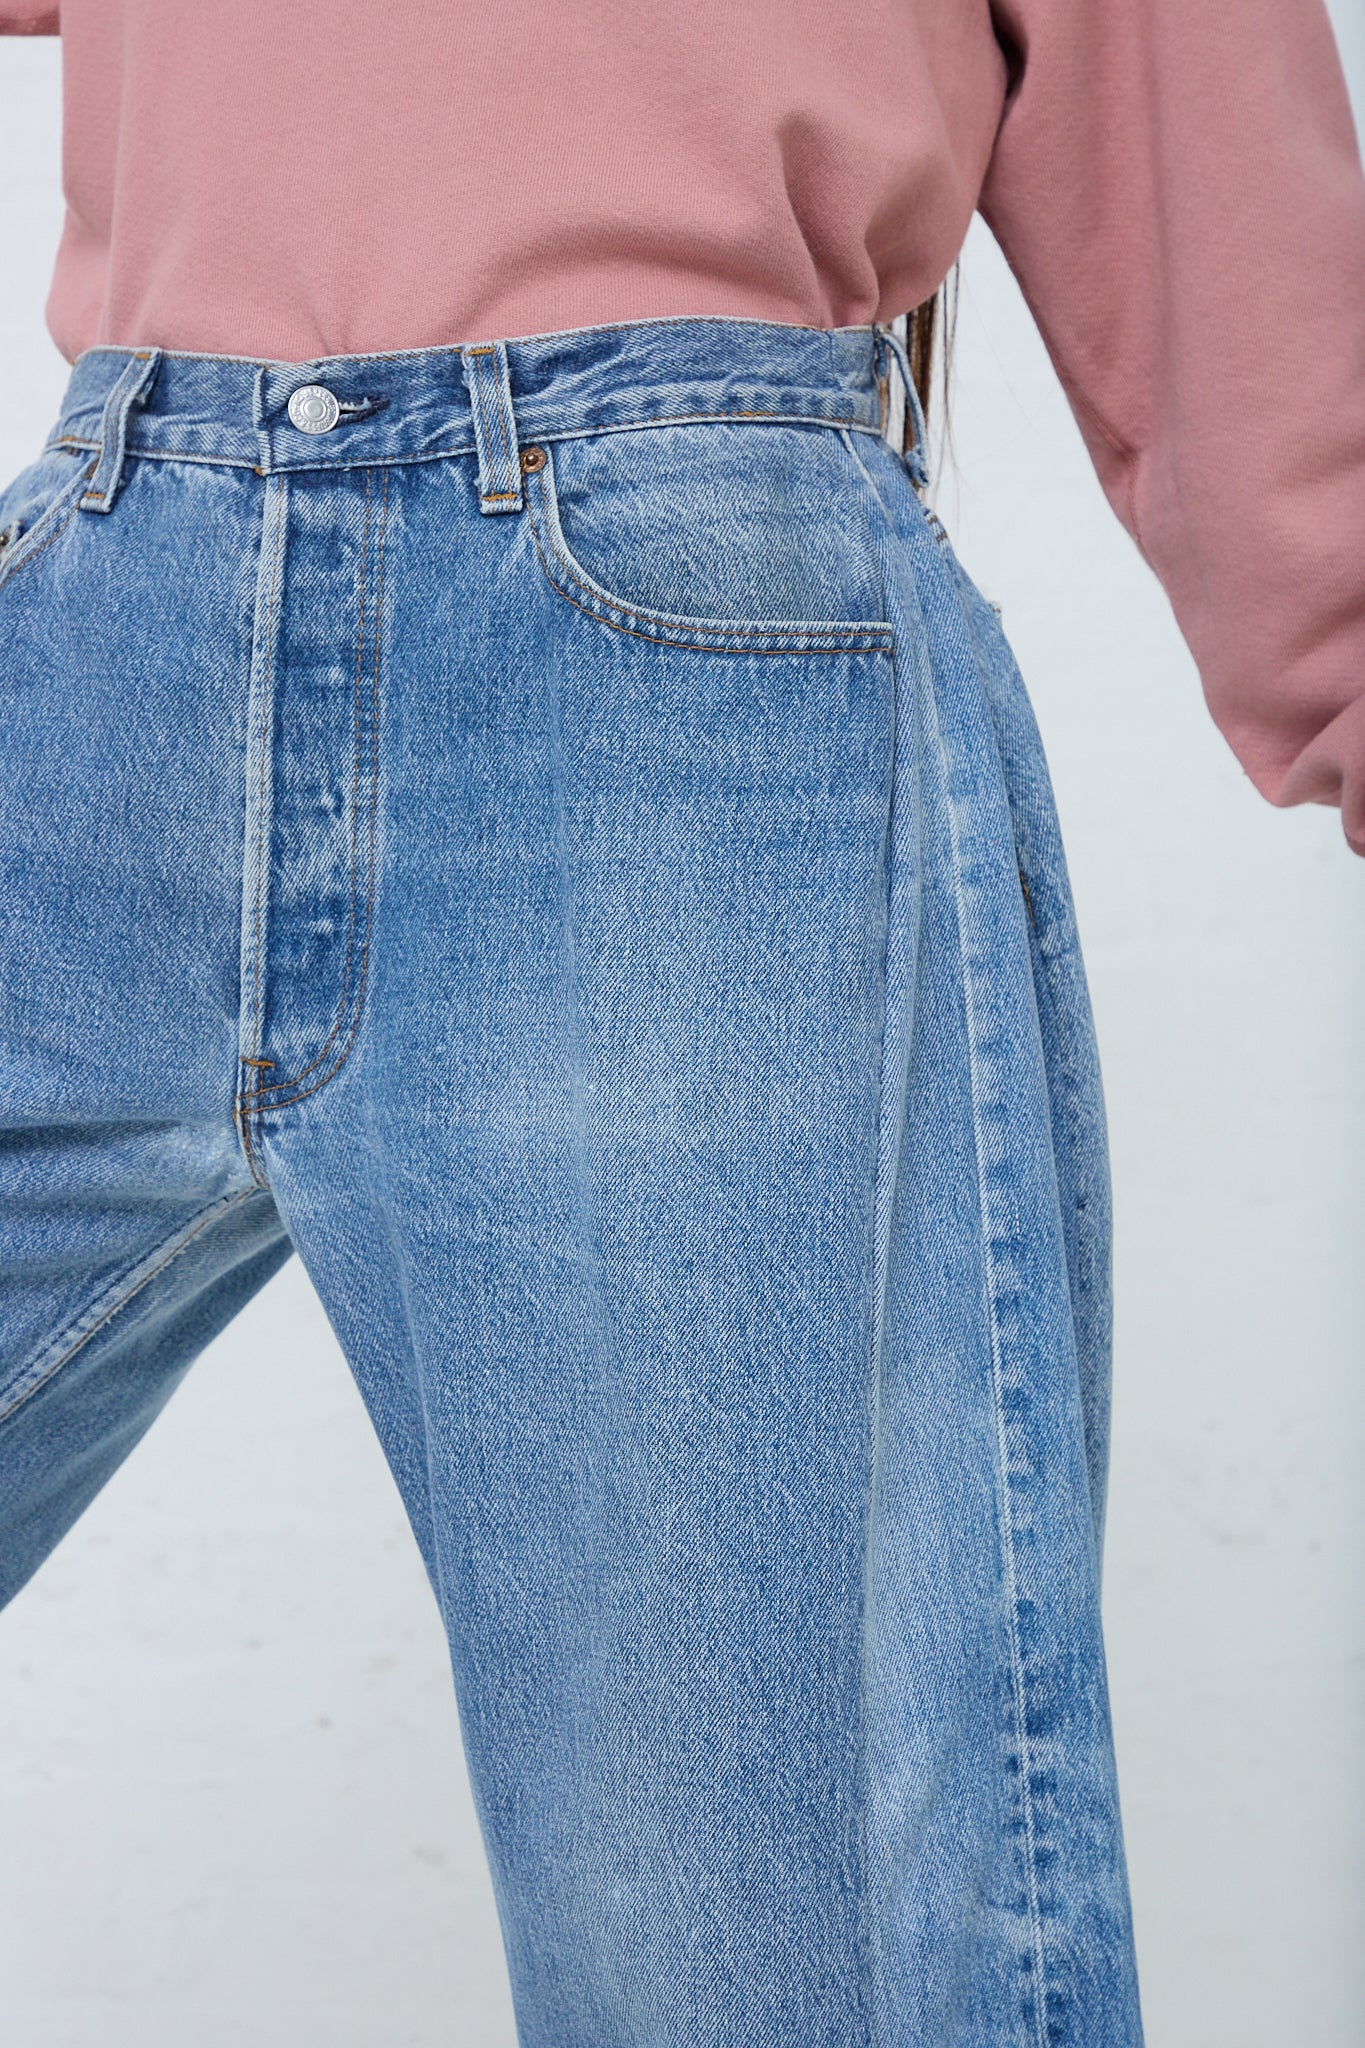 A woman in a pink sweater is wearing B Sides' Lasso Jean in Vintage Indigo.